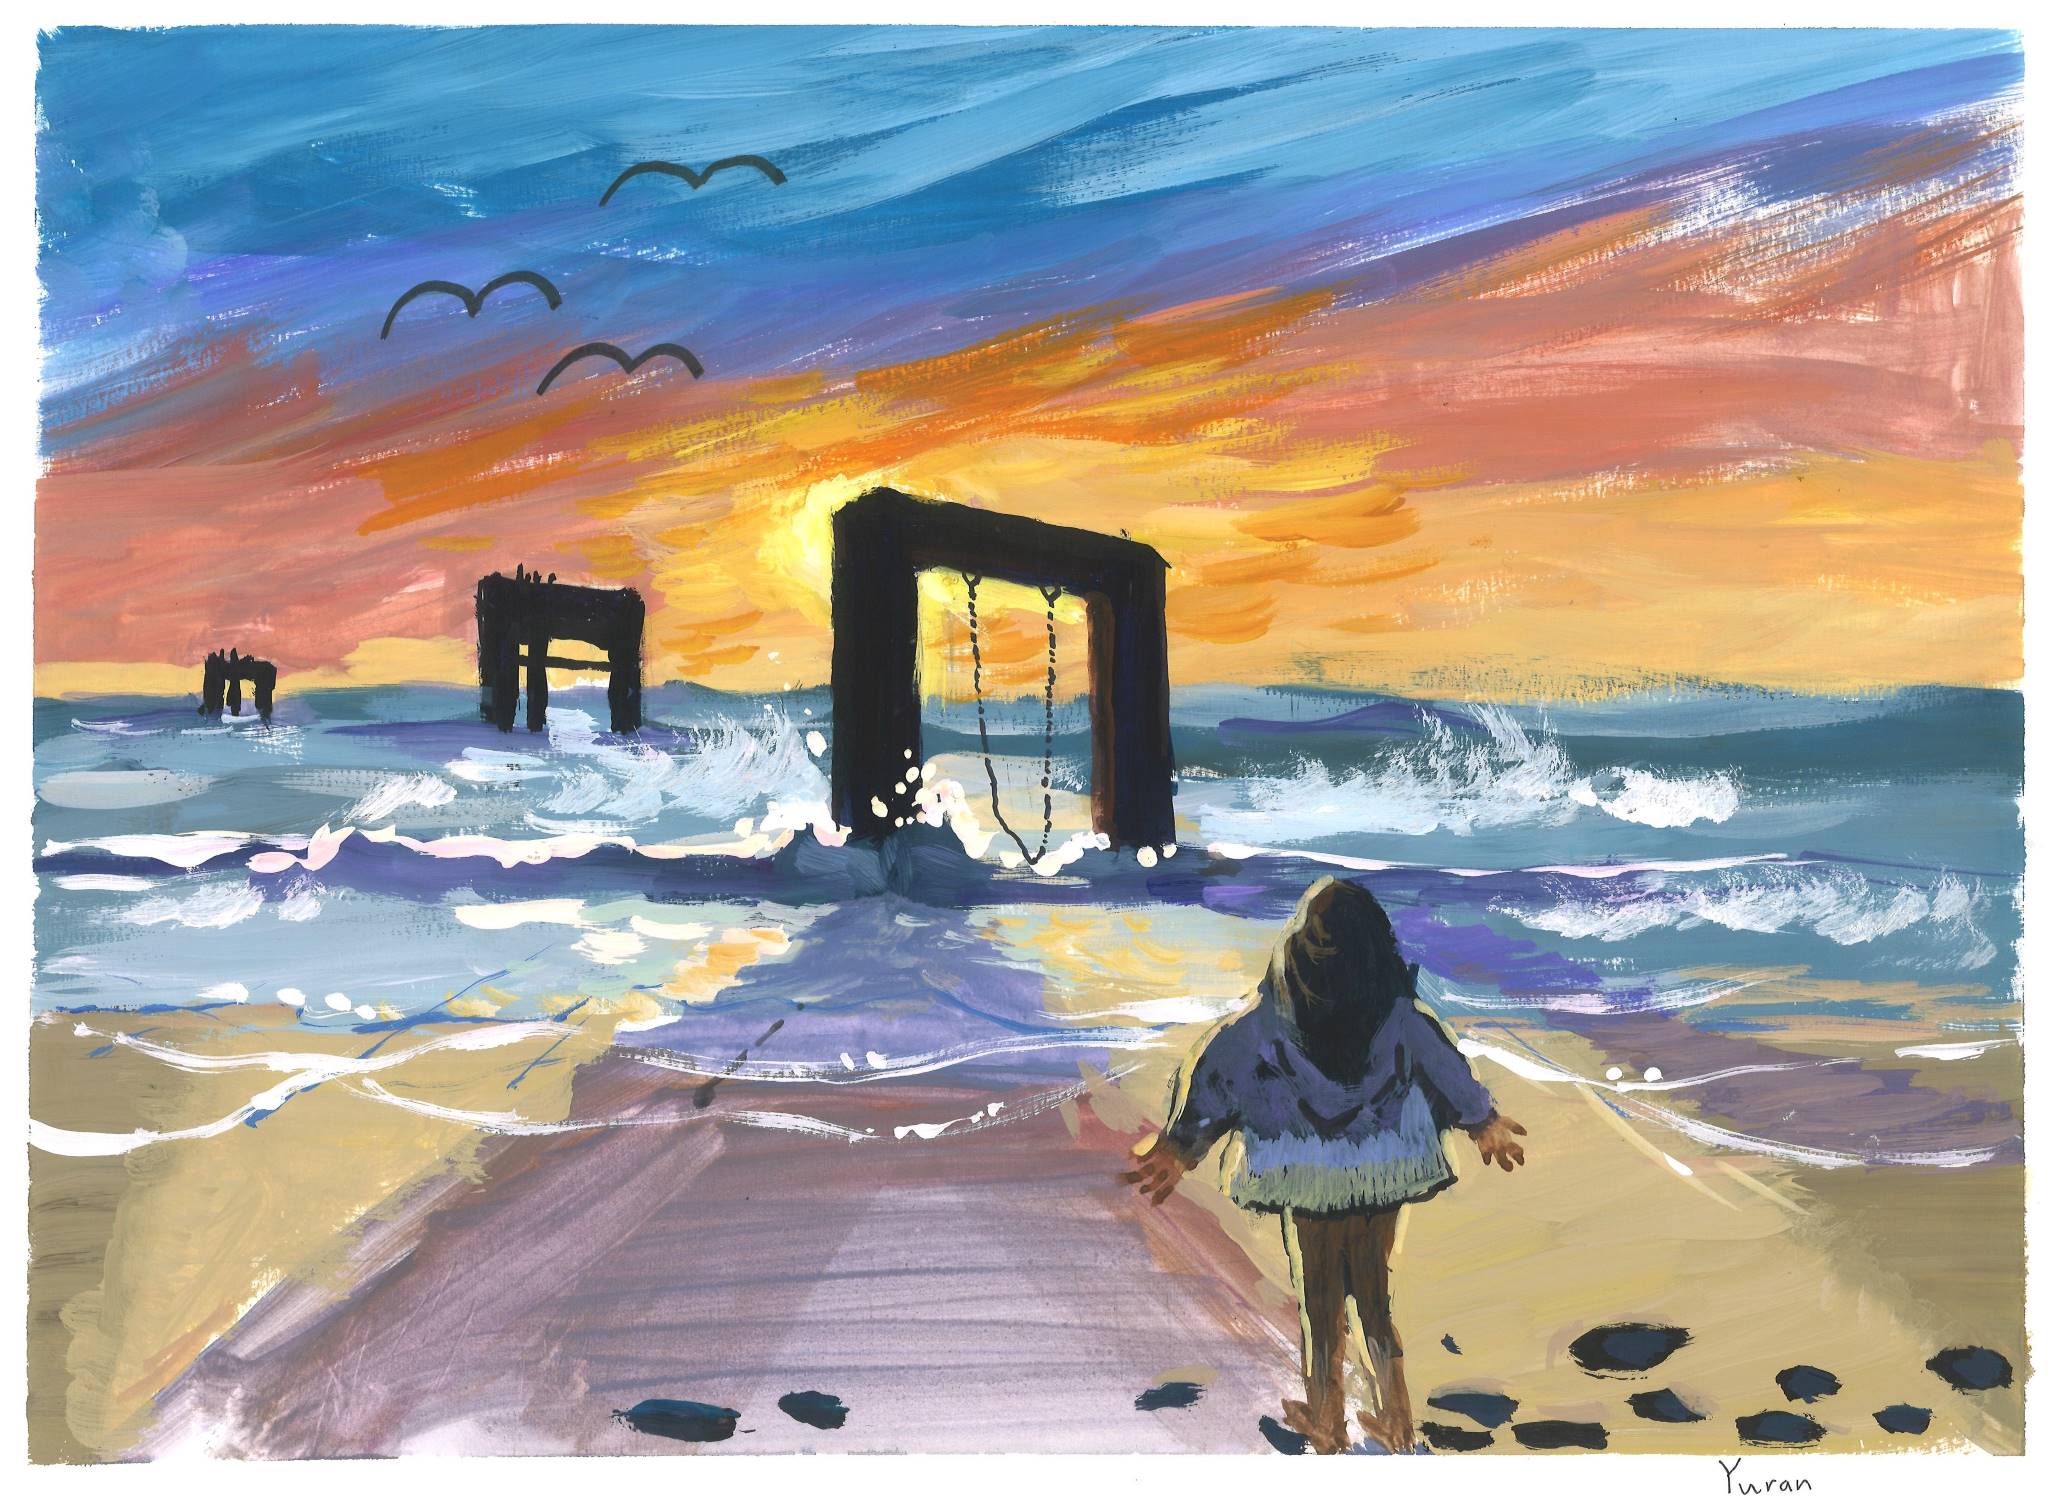 A child stands on the beach facing the ocean and the sunset. Remnents of a pier are in the distance.